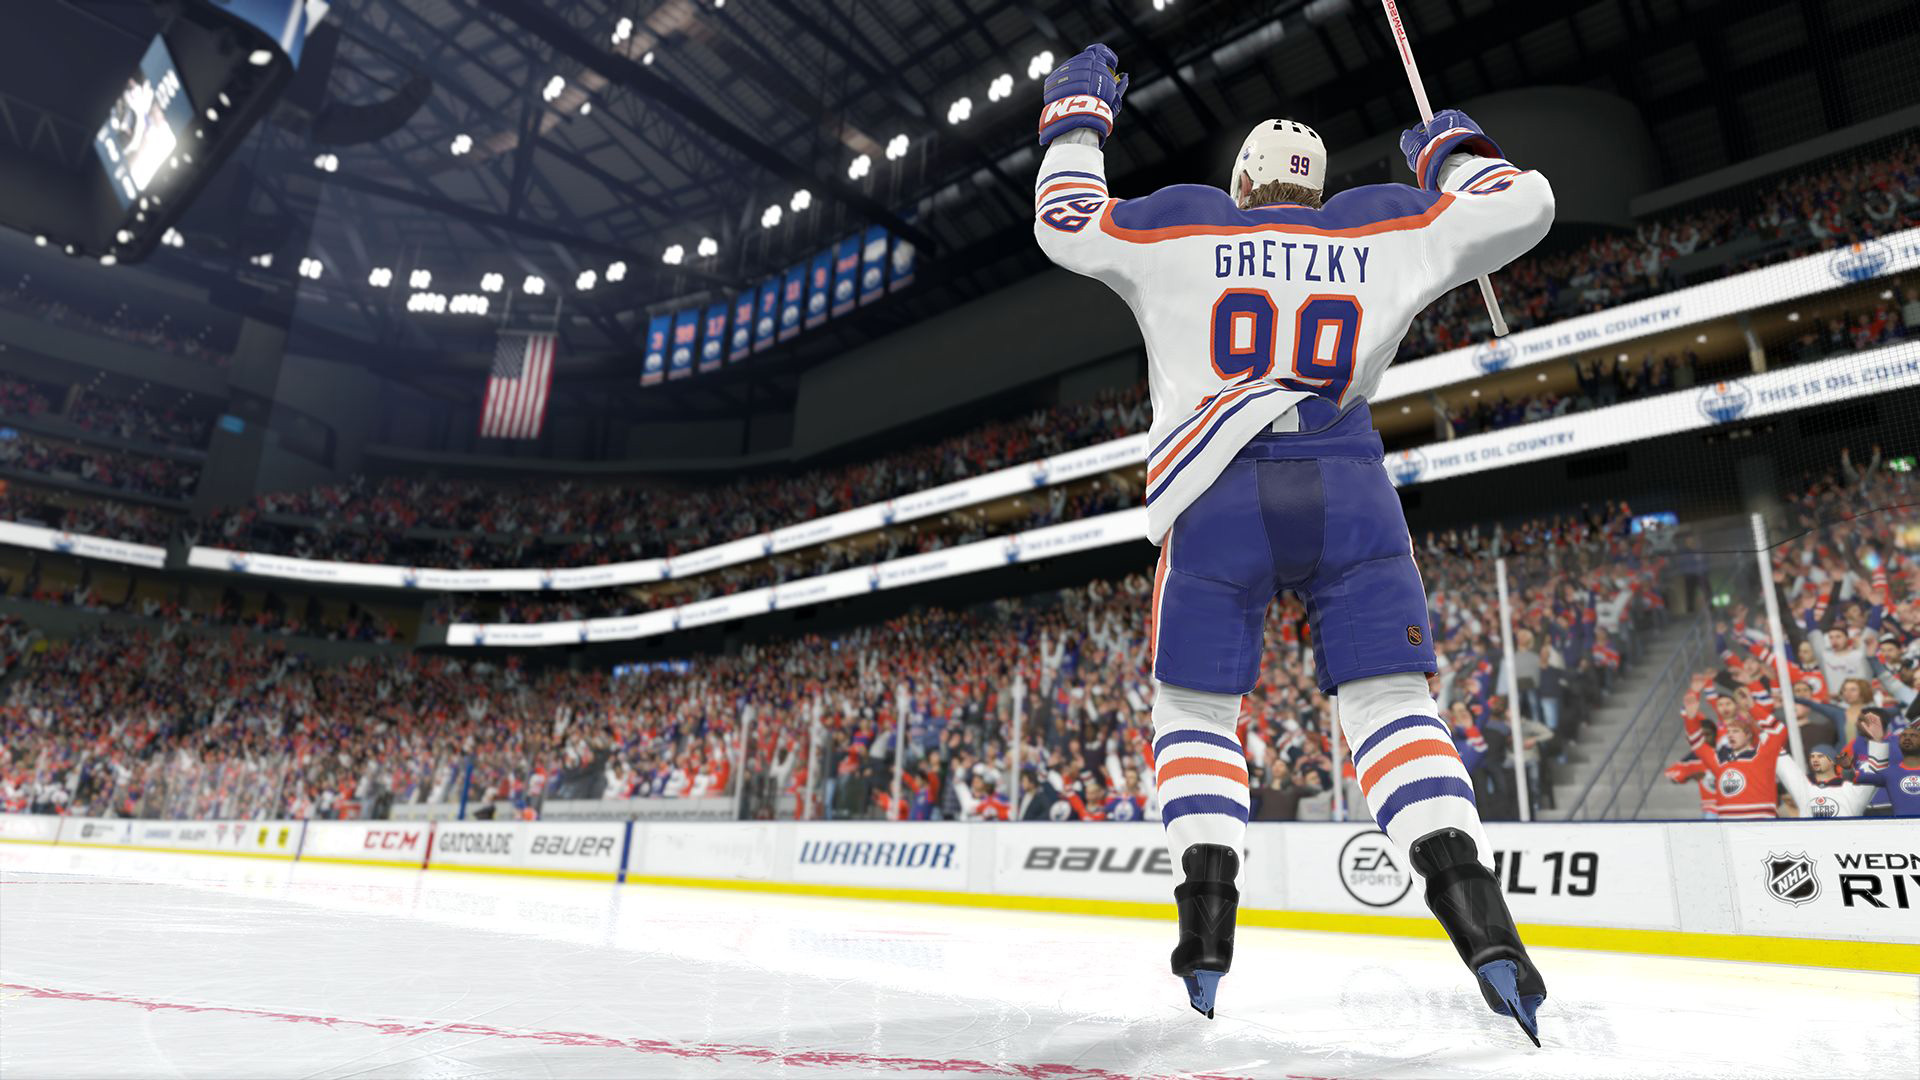 download free nhl 20 ps4